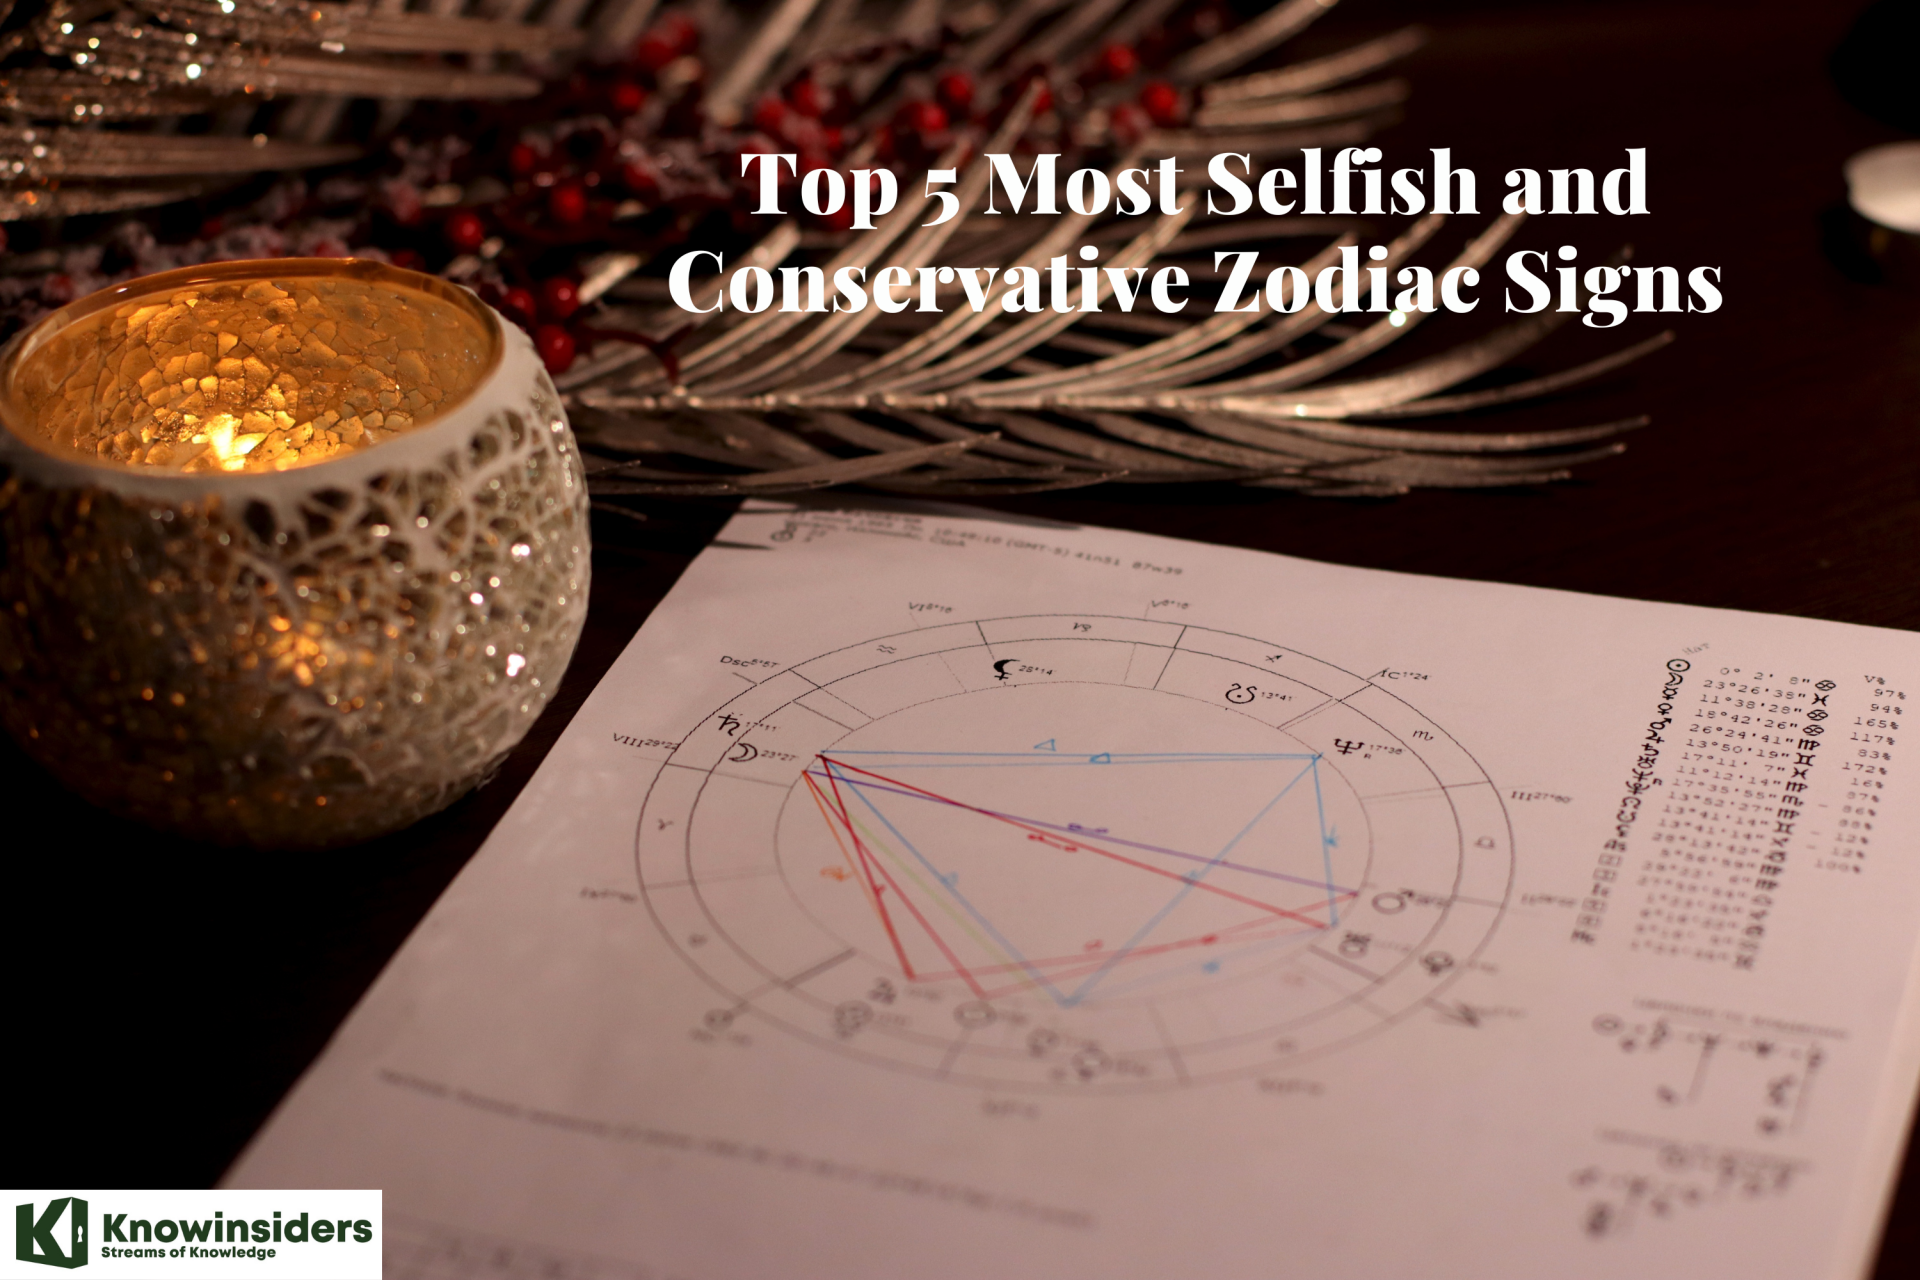 Top 5 Most Selfish and Conservative Zodiac Signs